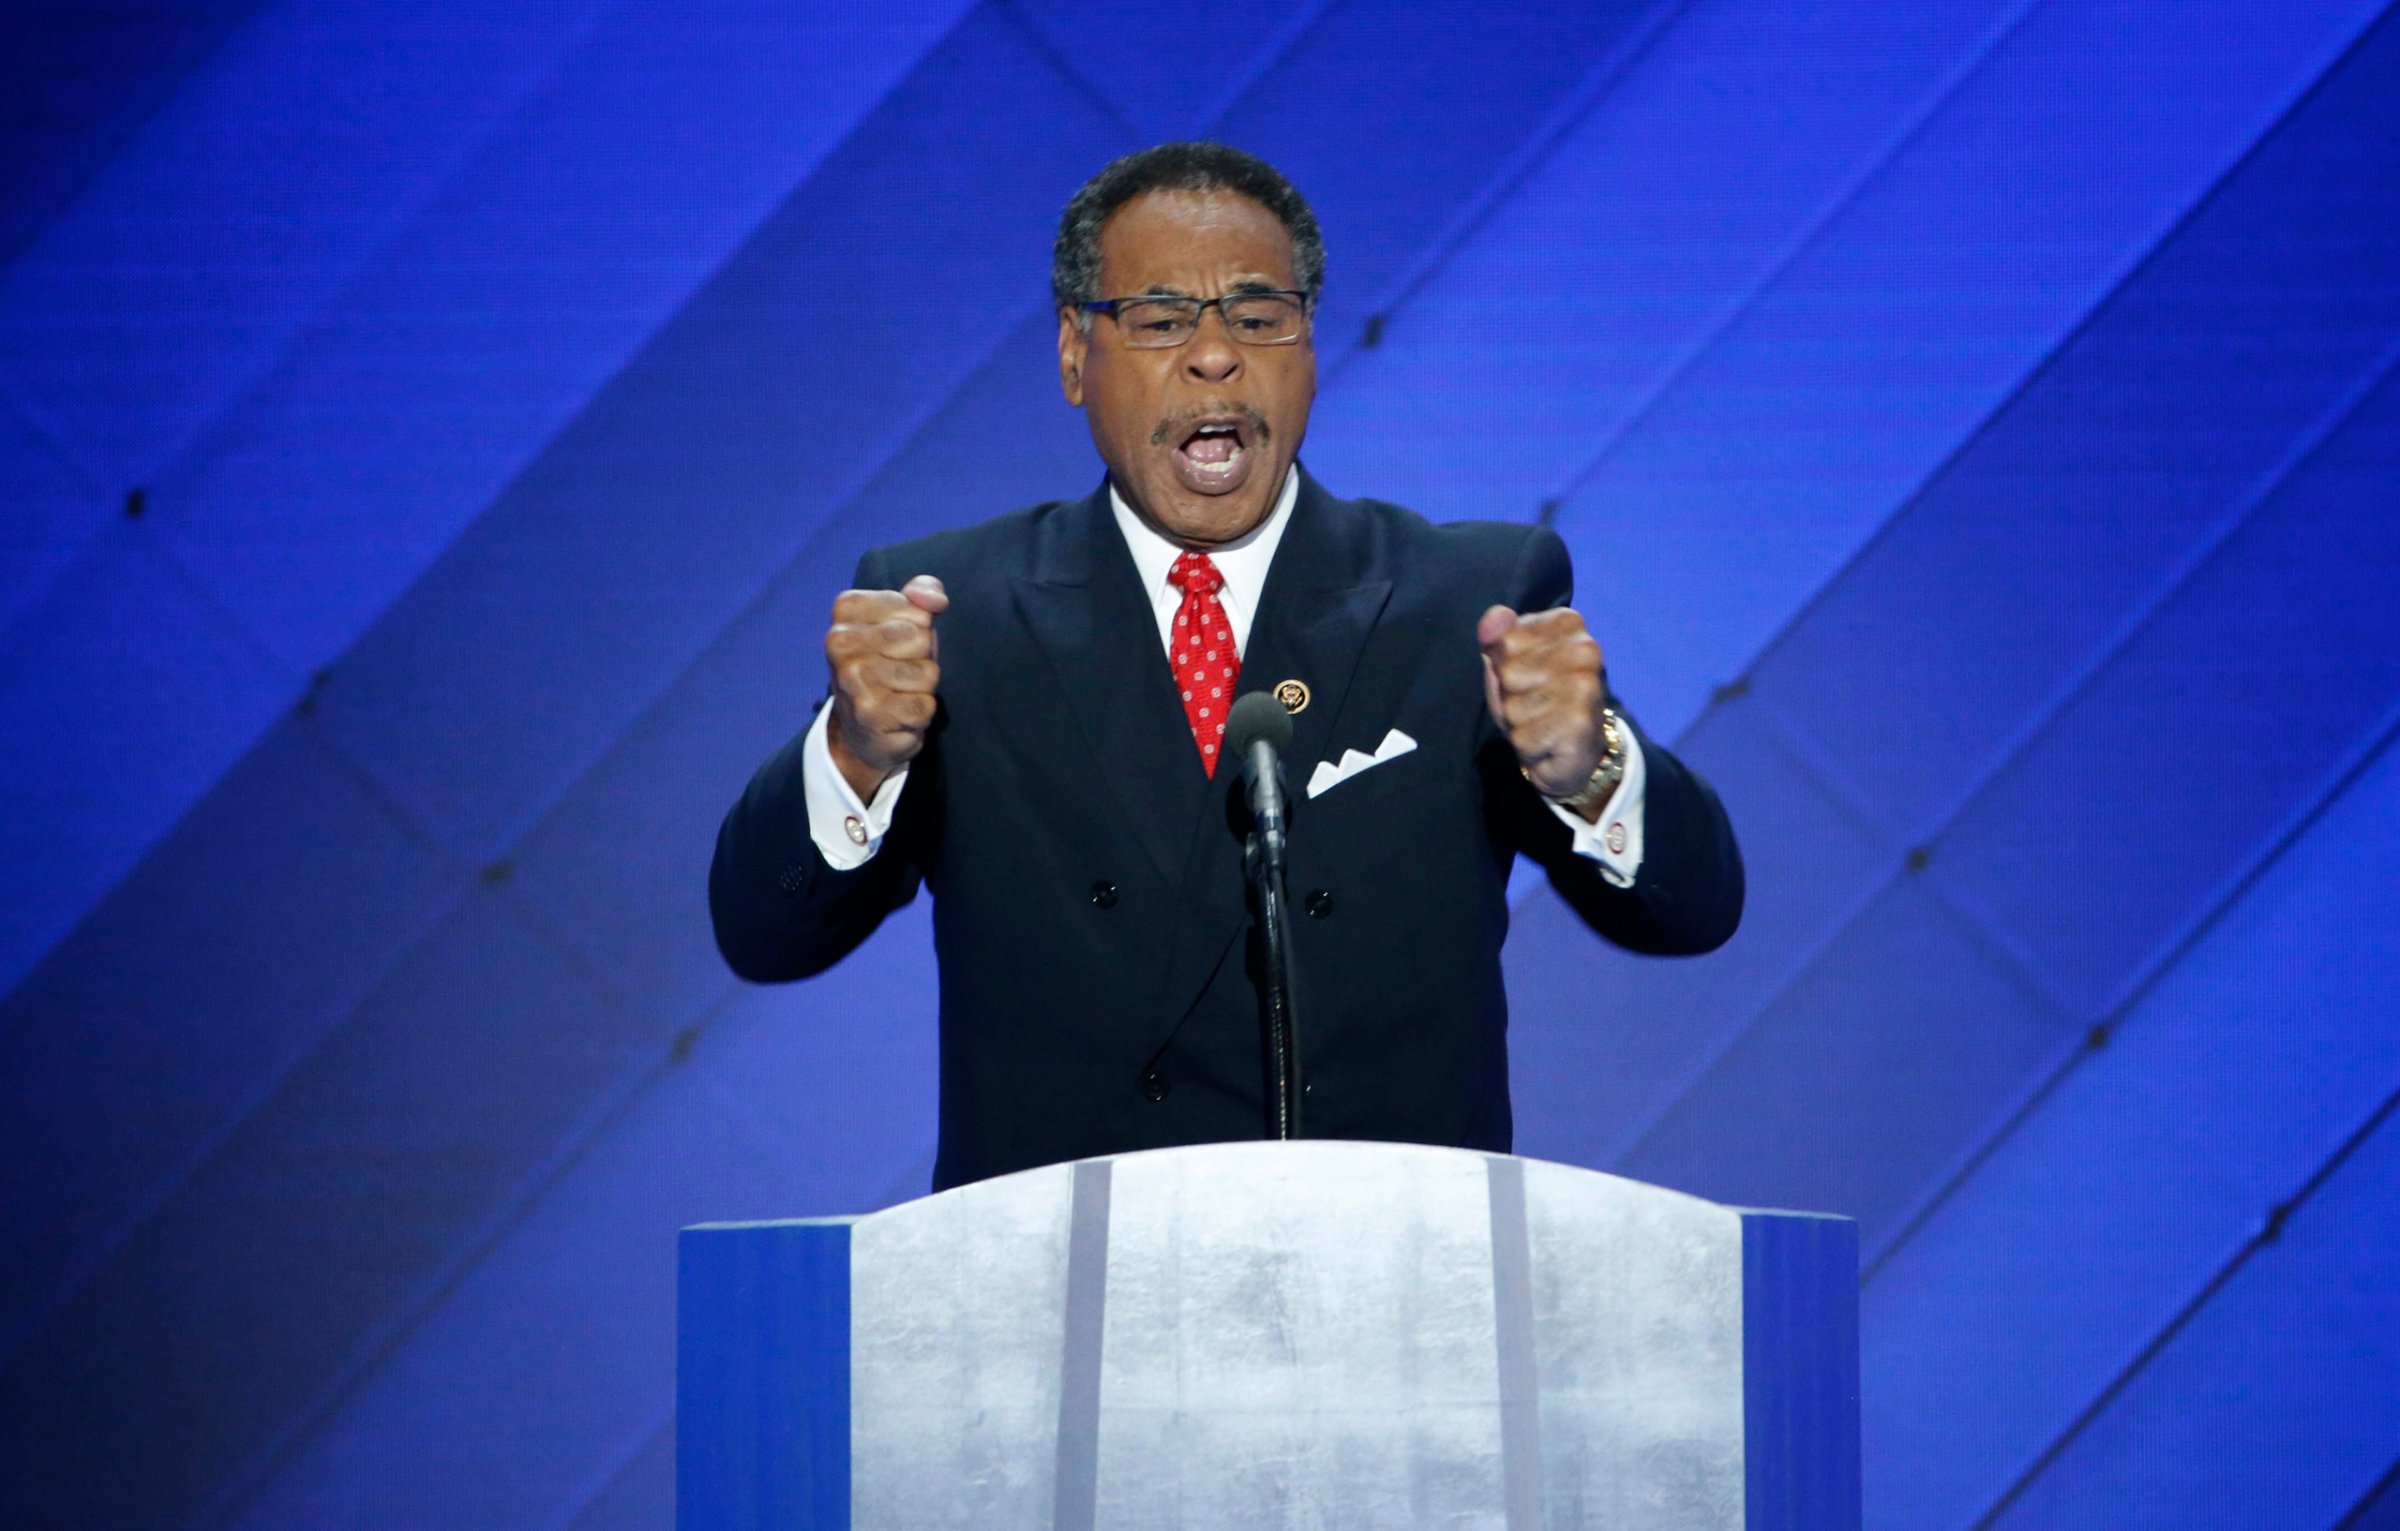 Representative from Missouri Emanuel Cleaver delivers remarks in the Wells Fargo Center on the final day of the 2016 Democratic National Convention in Philadelphia on July 28, 2016.